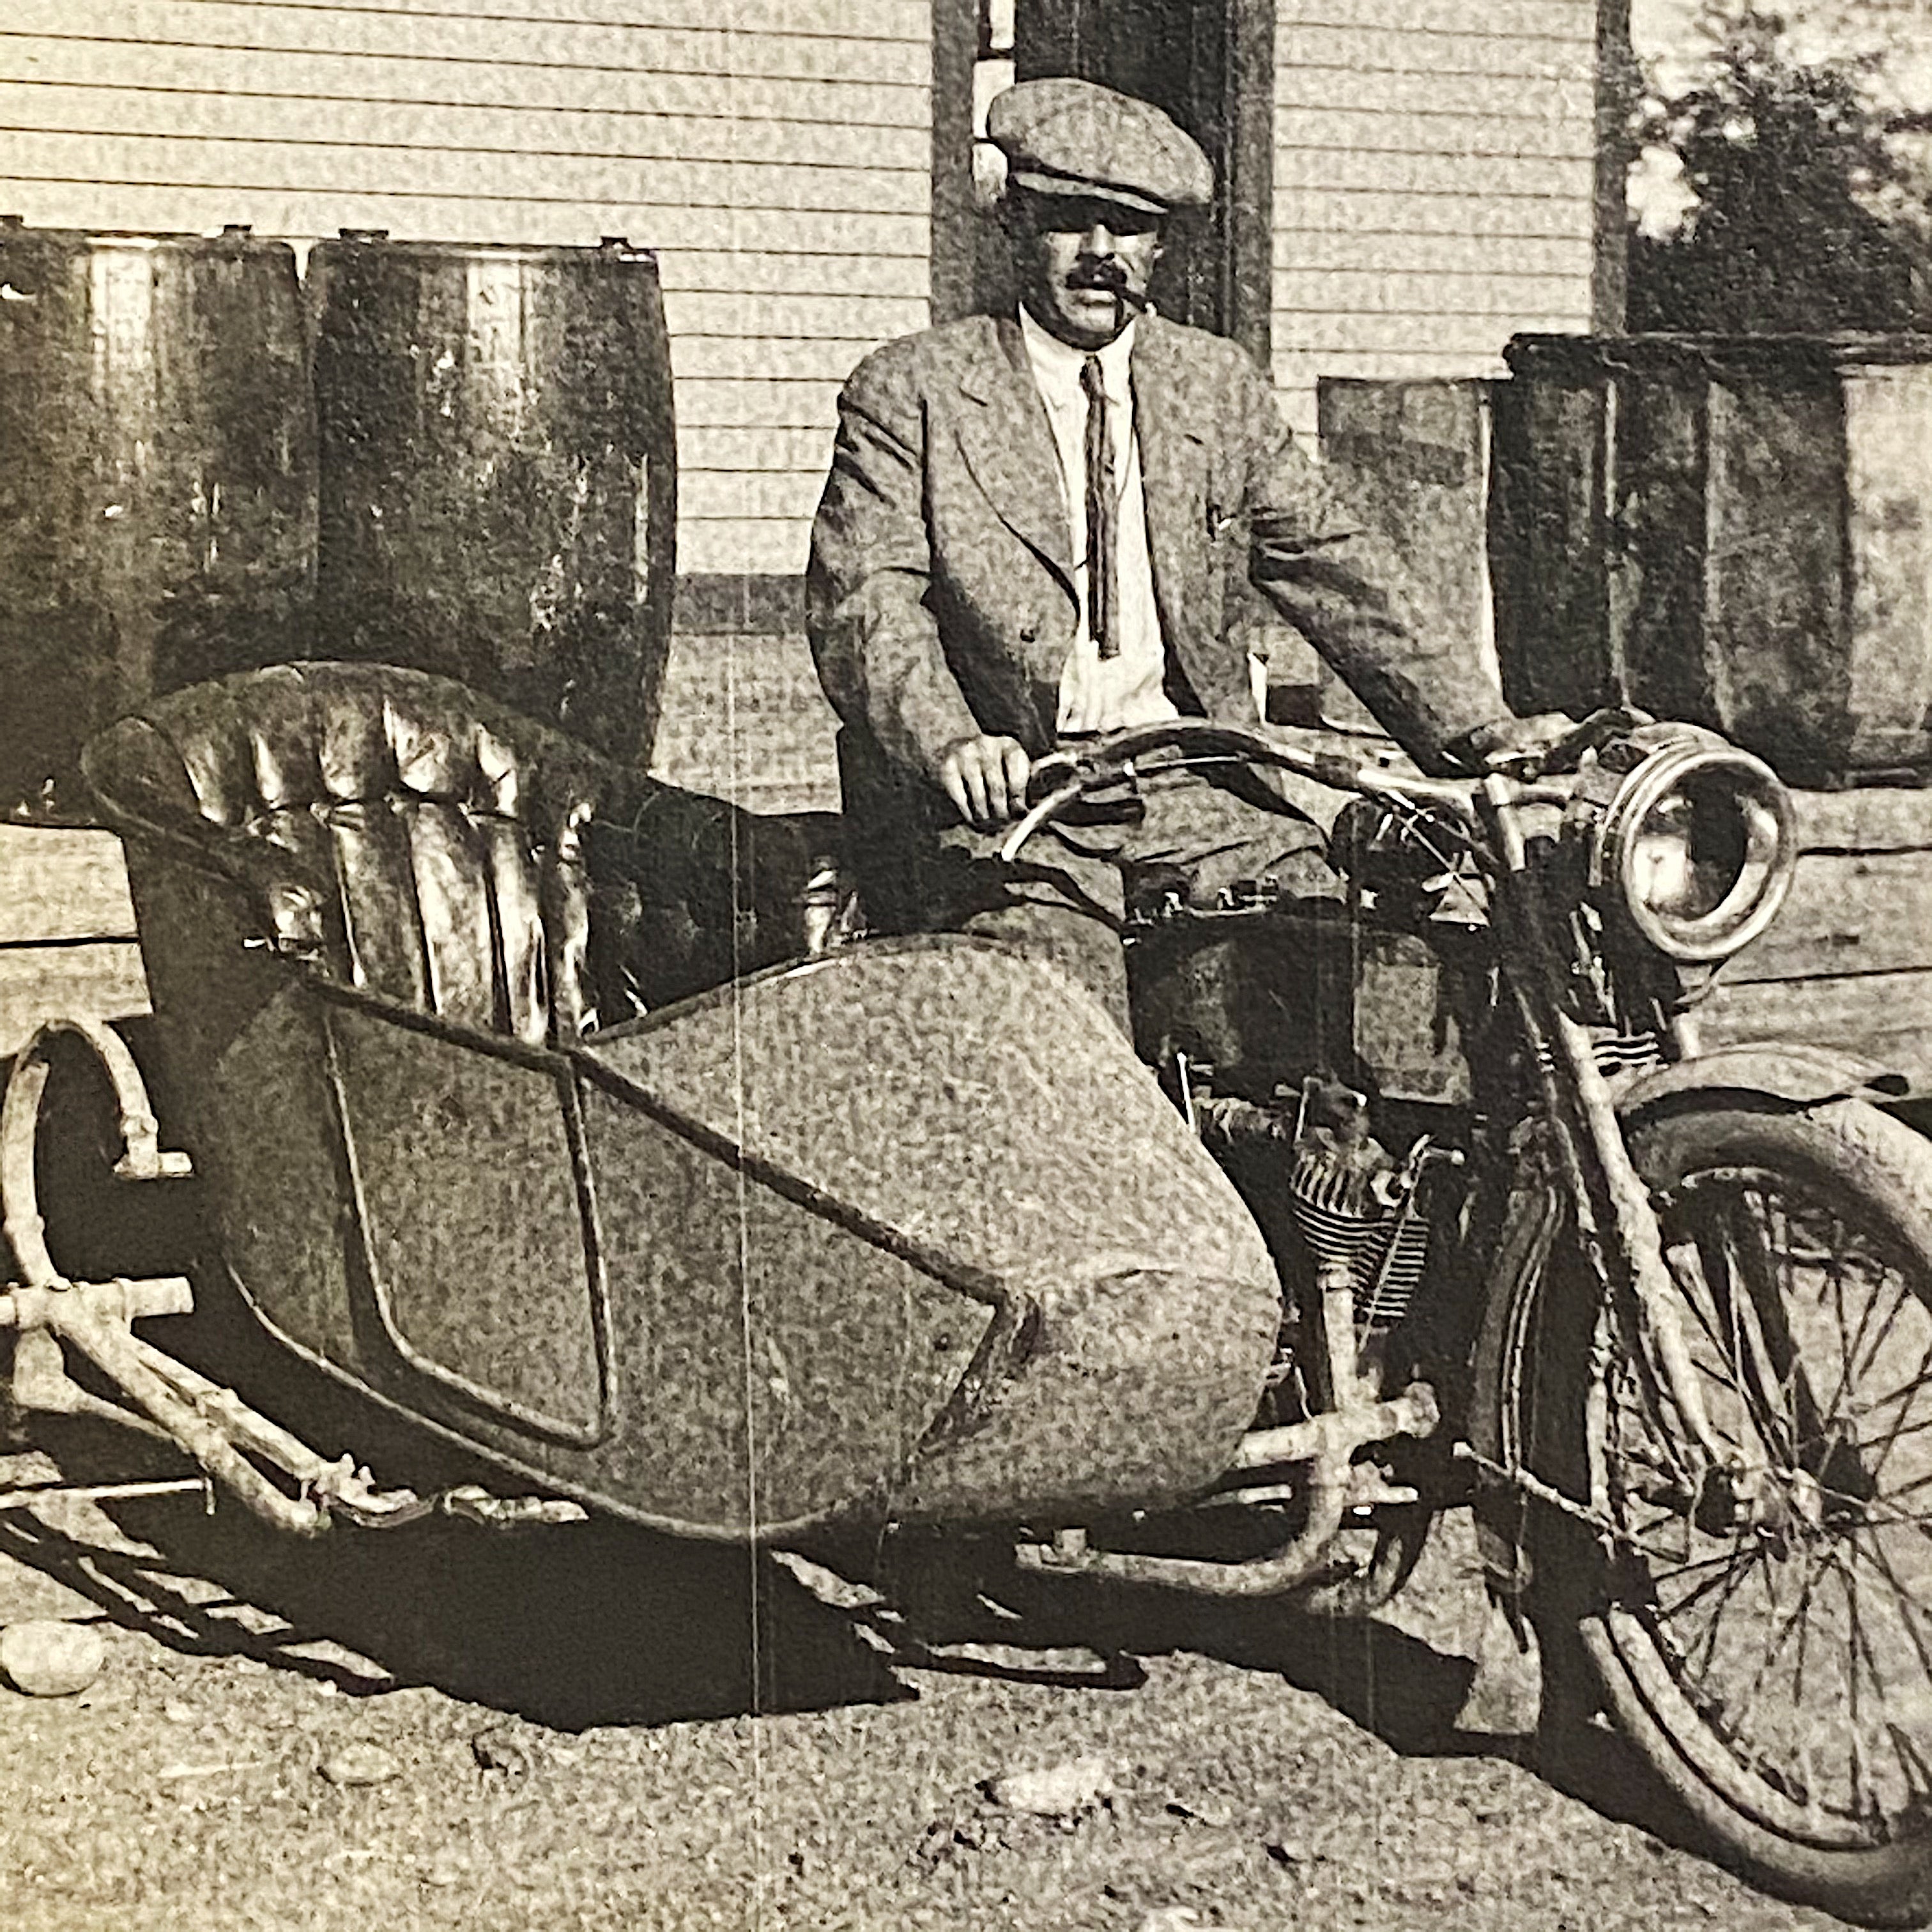 Old Motorcycle and Sidecar from Antique Photo Album from Early 1900s - Indian Motorcycle - Car Racing - Railroad Photography - Camping - Military - 138 Photographs